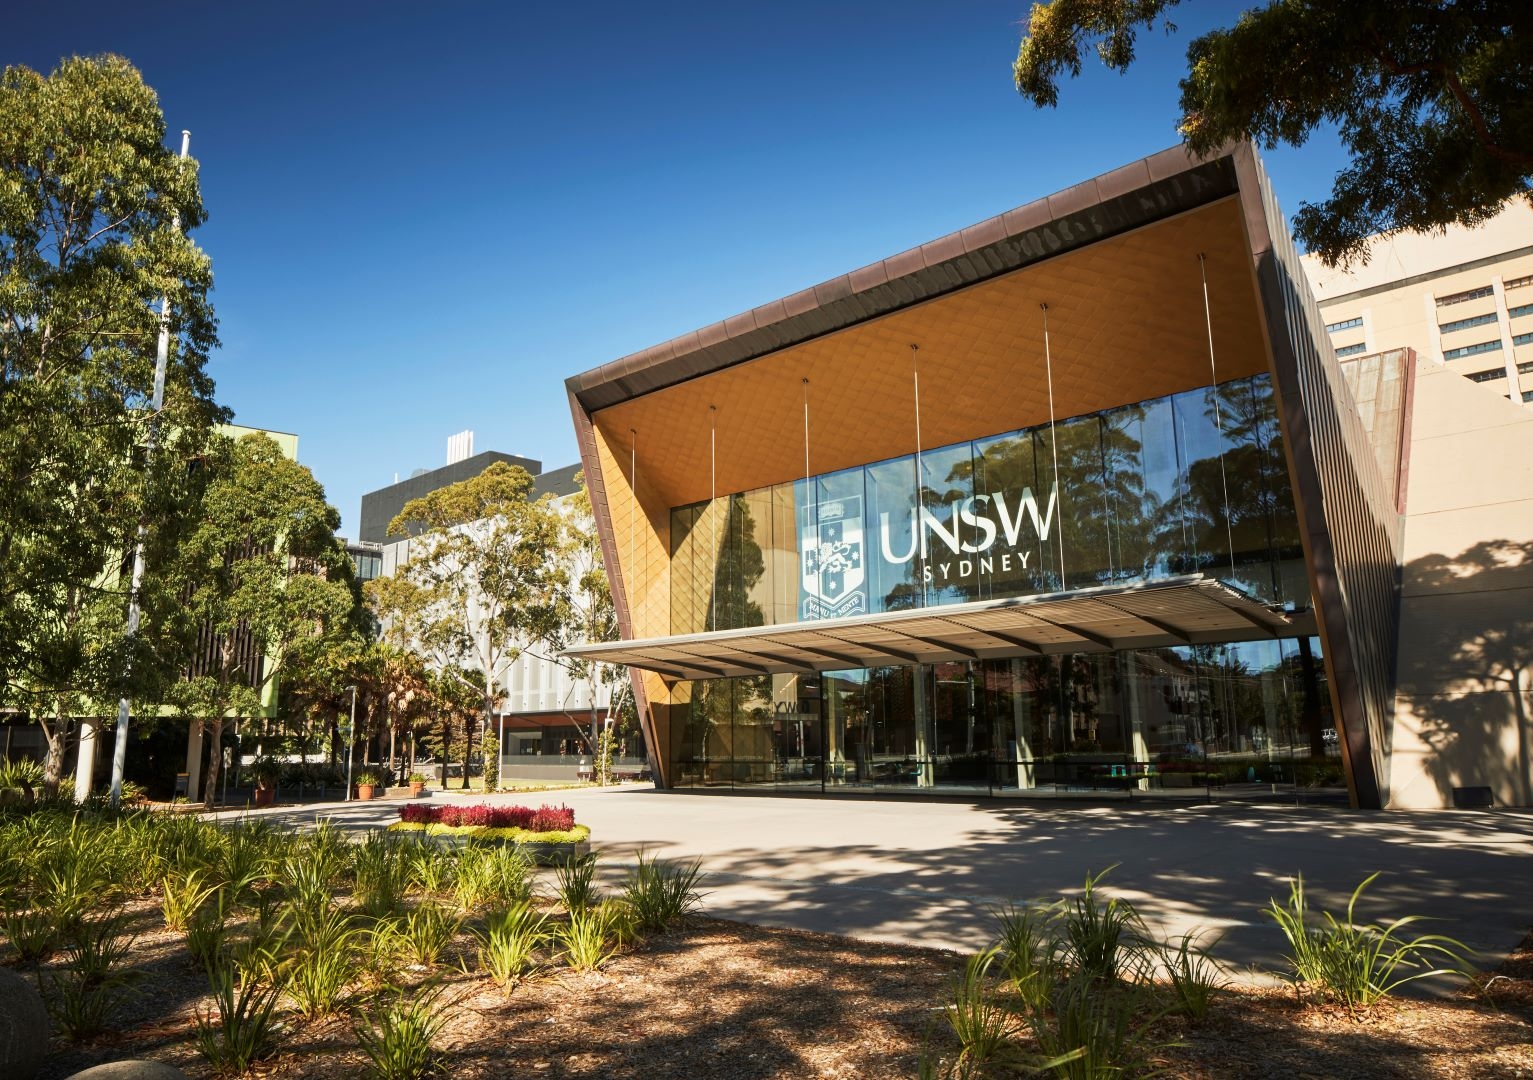 The 2022 Times Higher Education rankings showcase UNSW’s strength across a broad range of disciplines, notably STEM subjects.